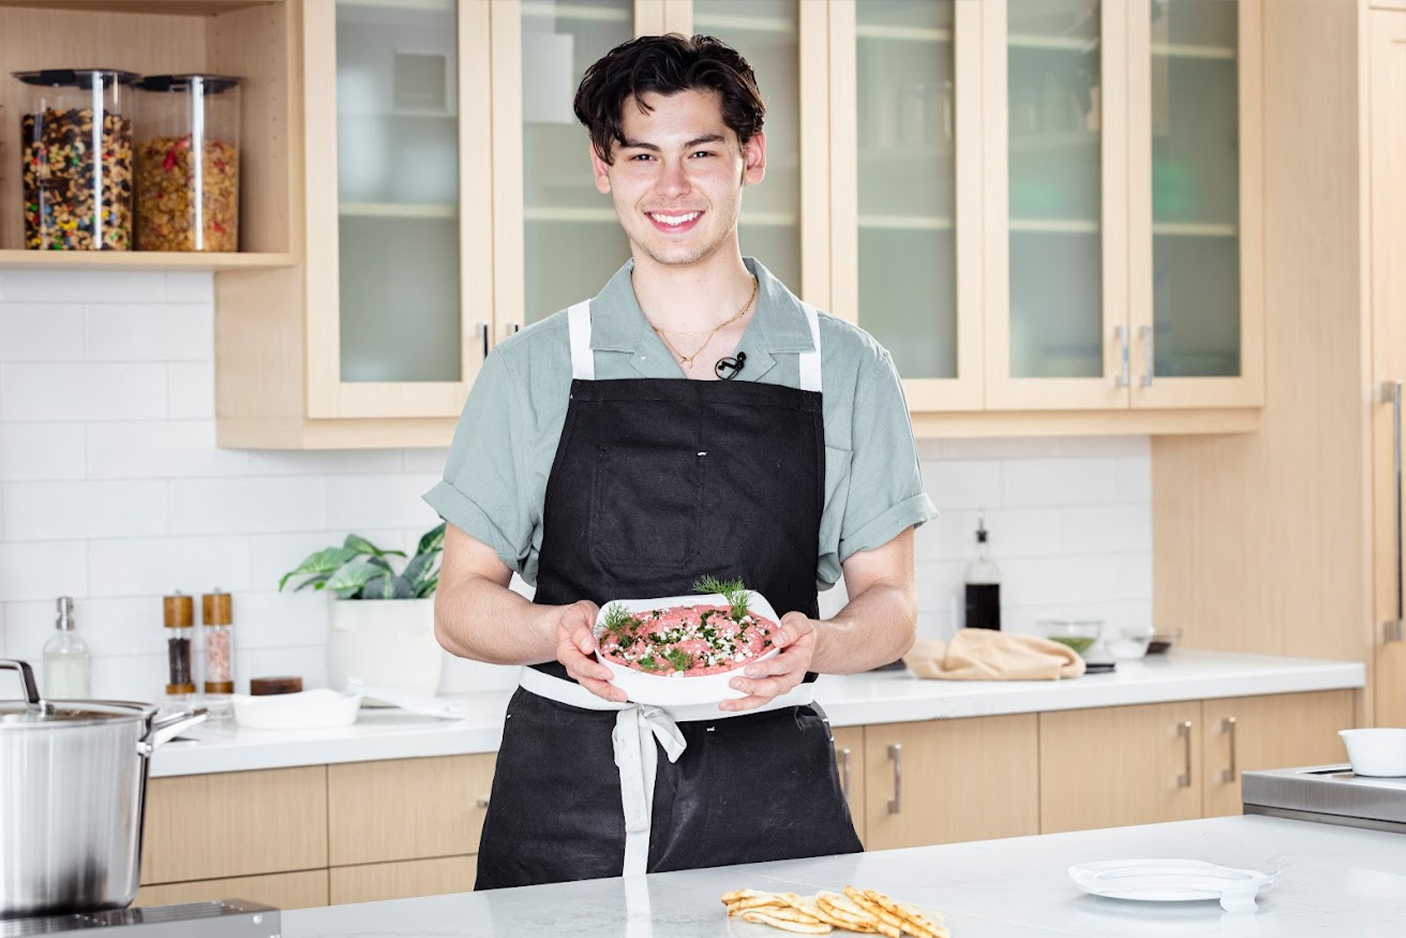 To celebrate the beginning of spring farmer&rsquo;s market season, TikToker <a href="https://www.tiktok.com/@scheckeats?lang=en" target="_blank" rel="nofollow" title="TikTok">@ScheckEats</a> unveiled two new recipes in partnership with the Newell Creative Kitchen, a new immersive kitchen space.